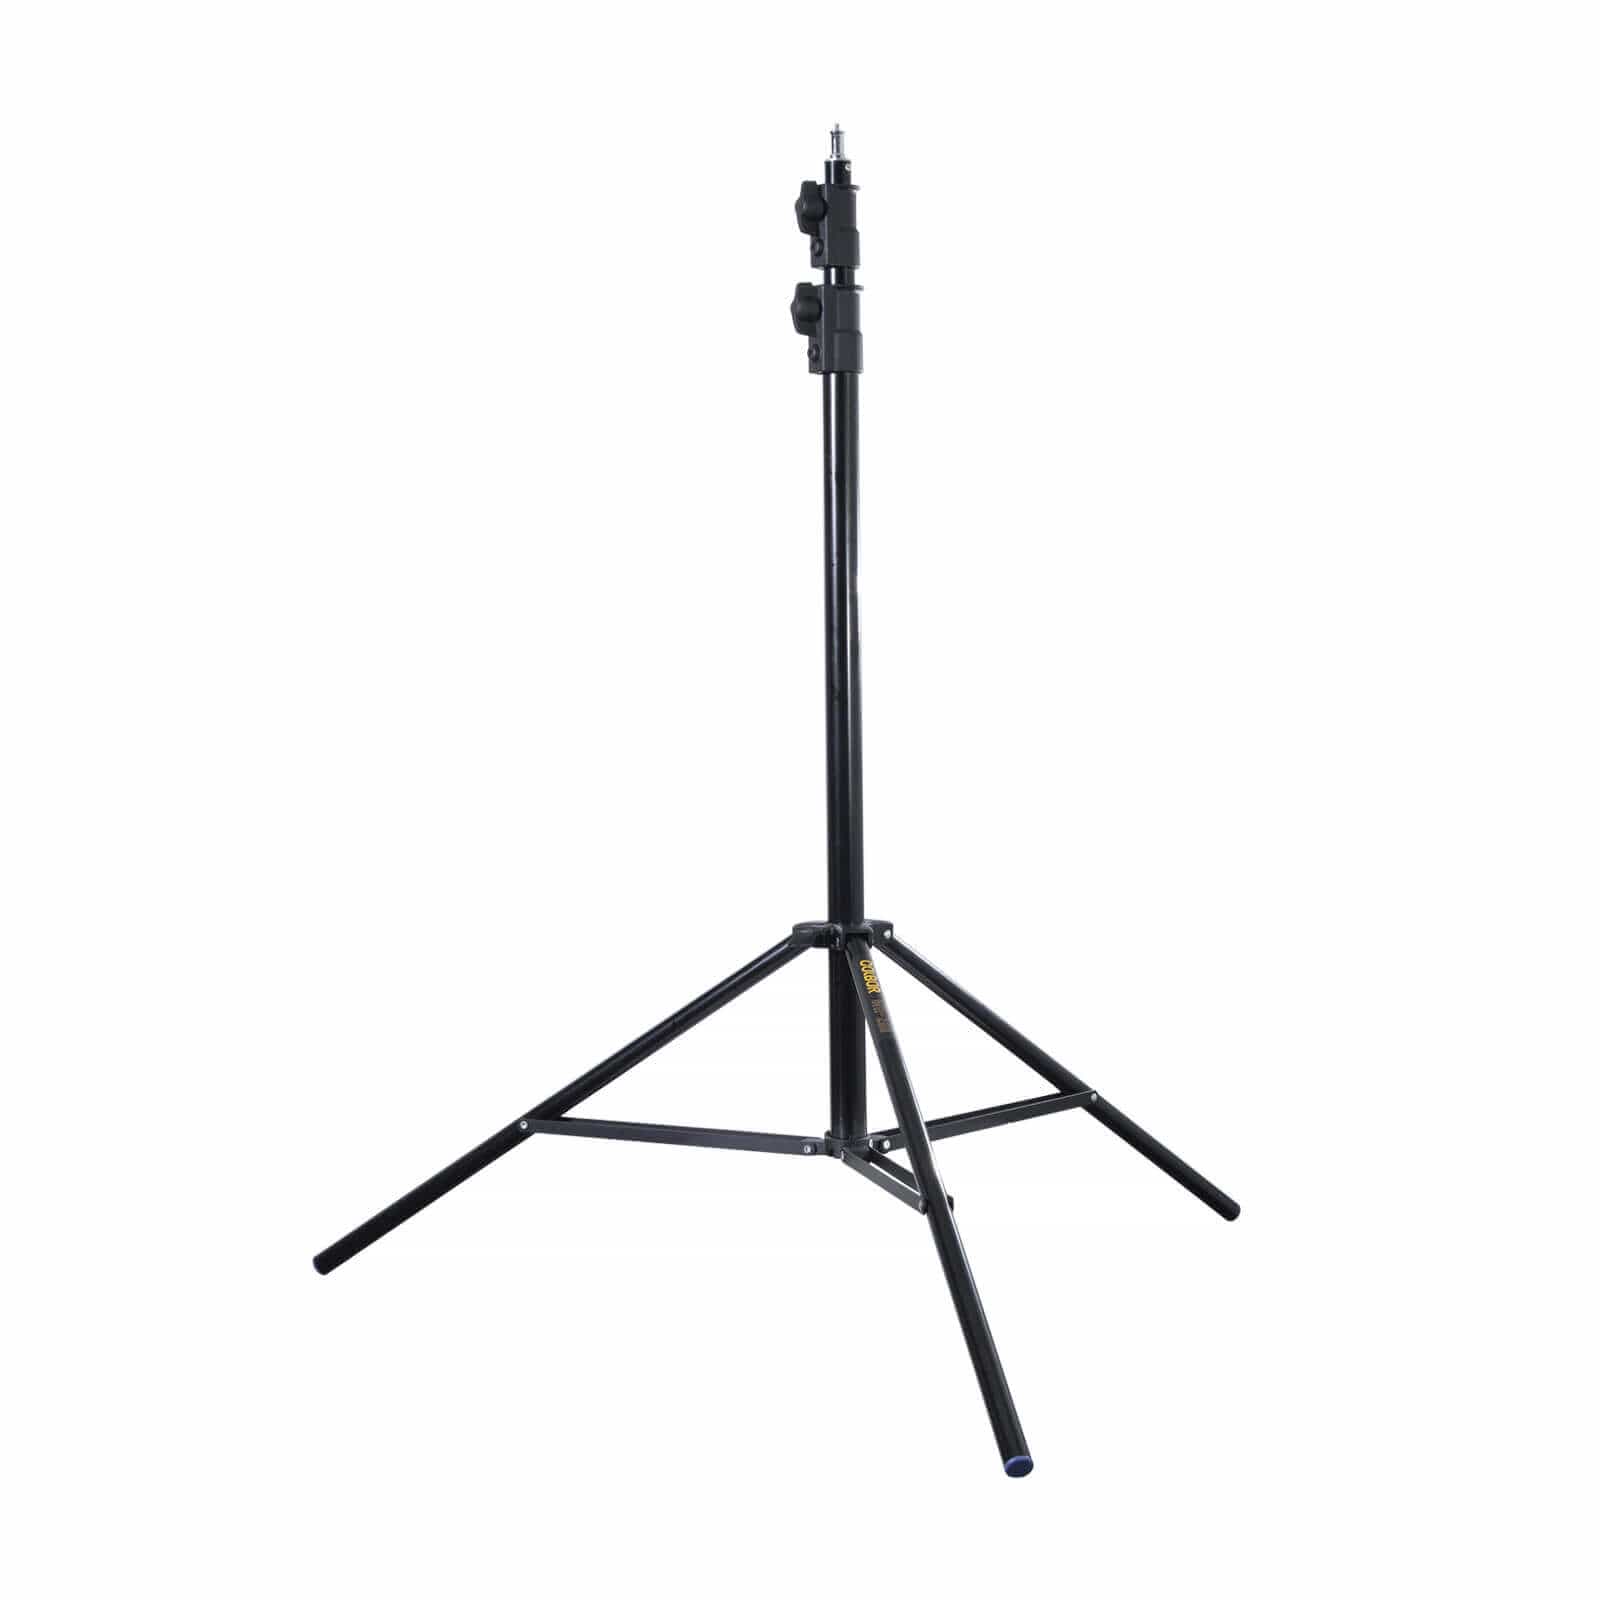 COLBOR WH-260 is quick-setup and adjustable in height.